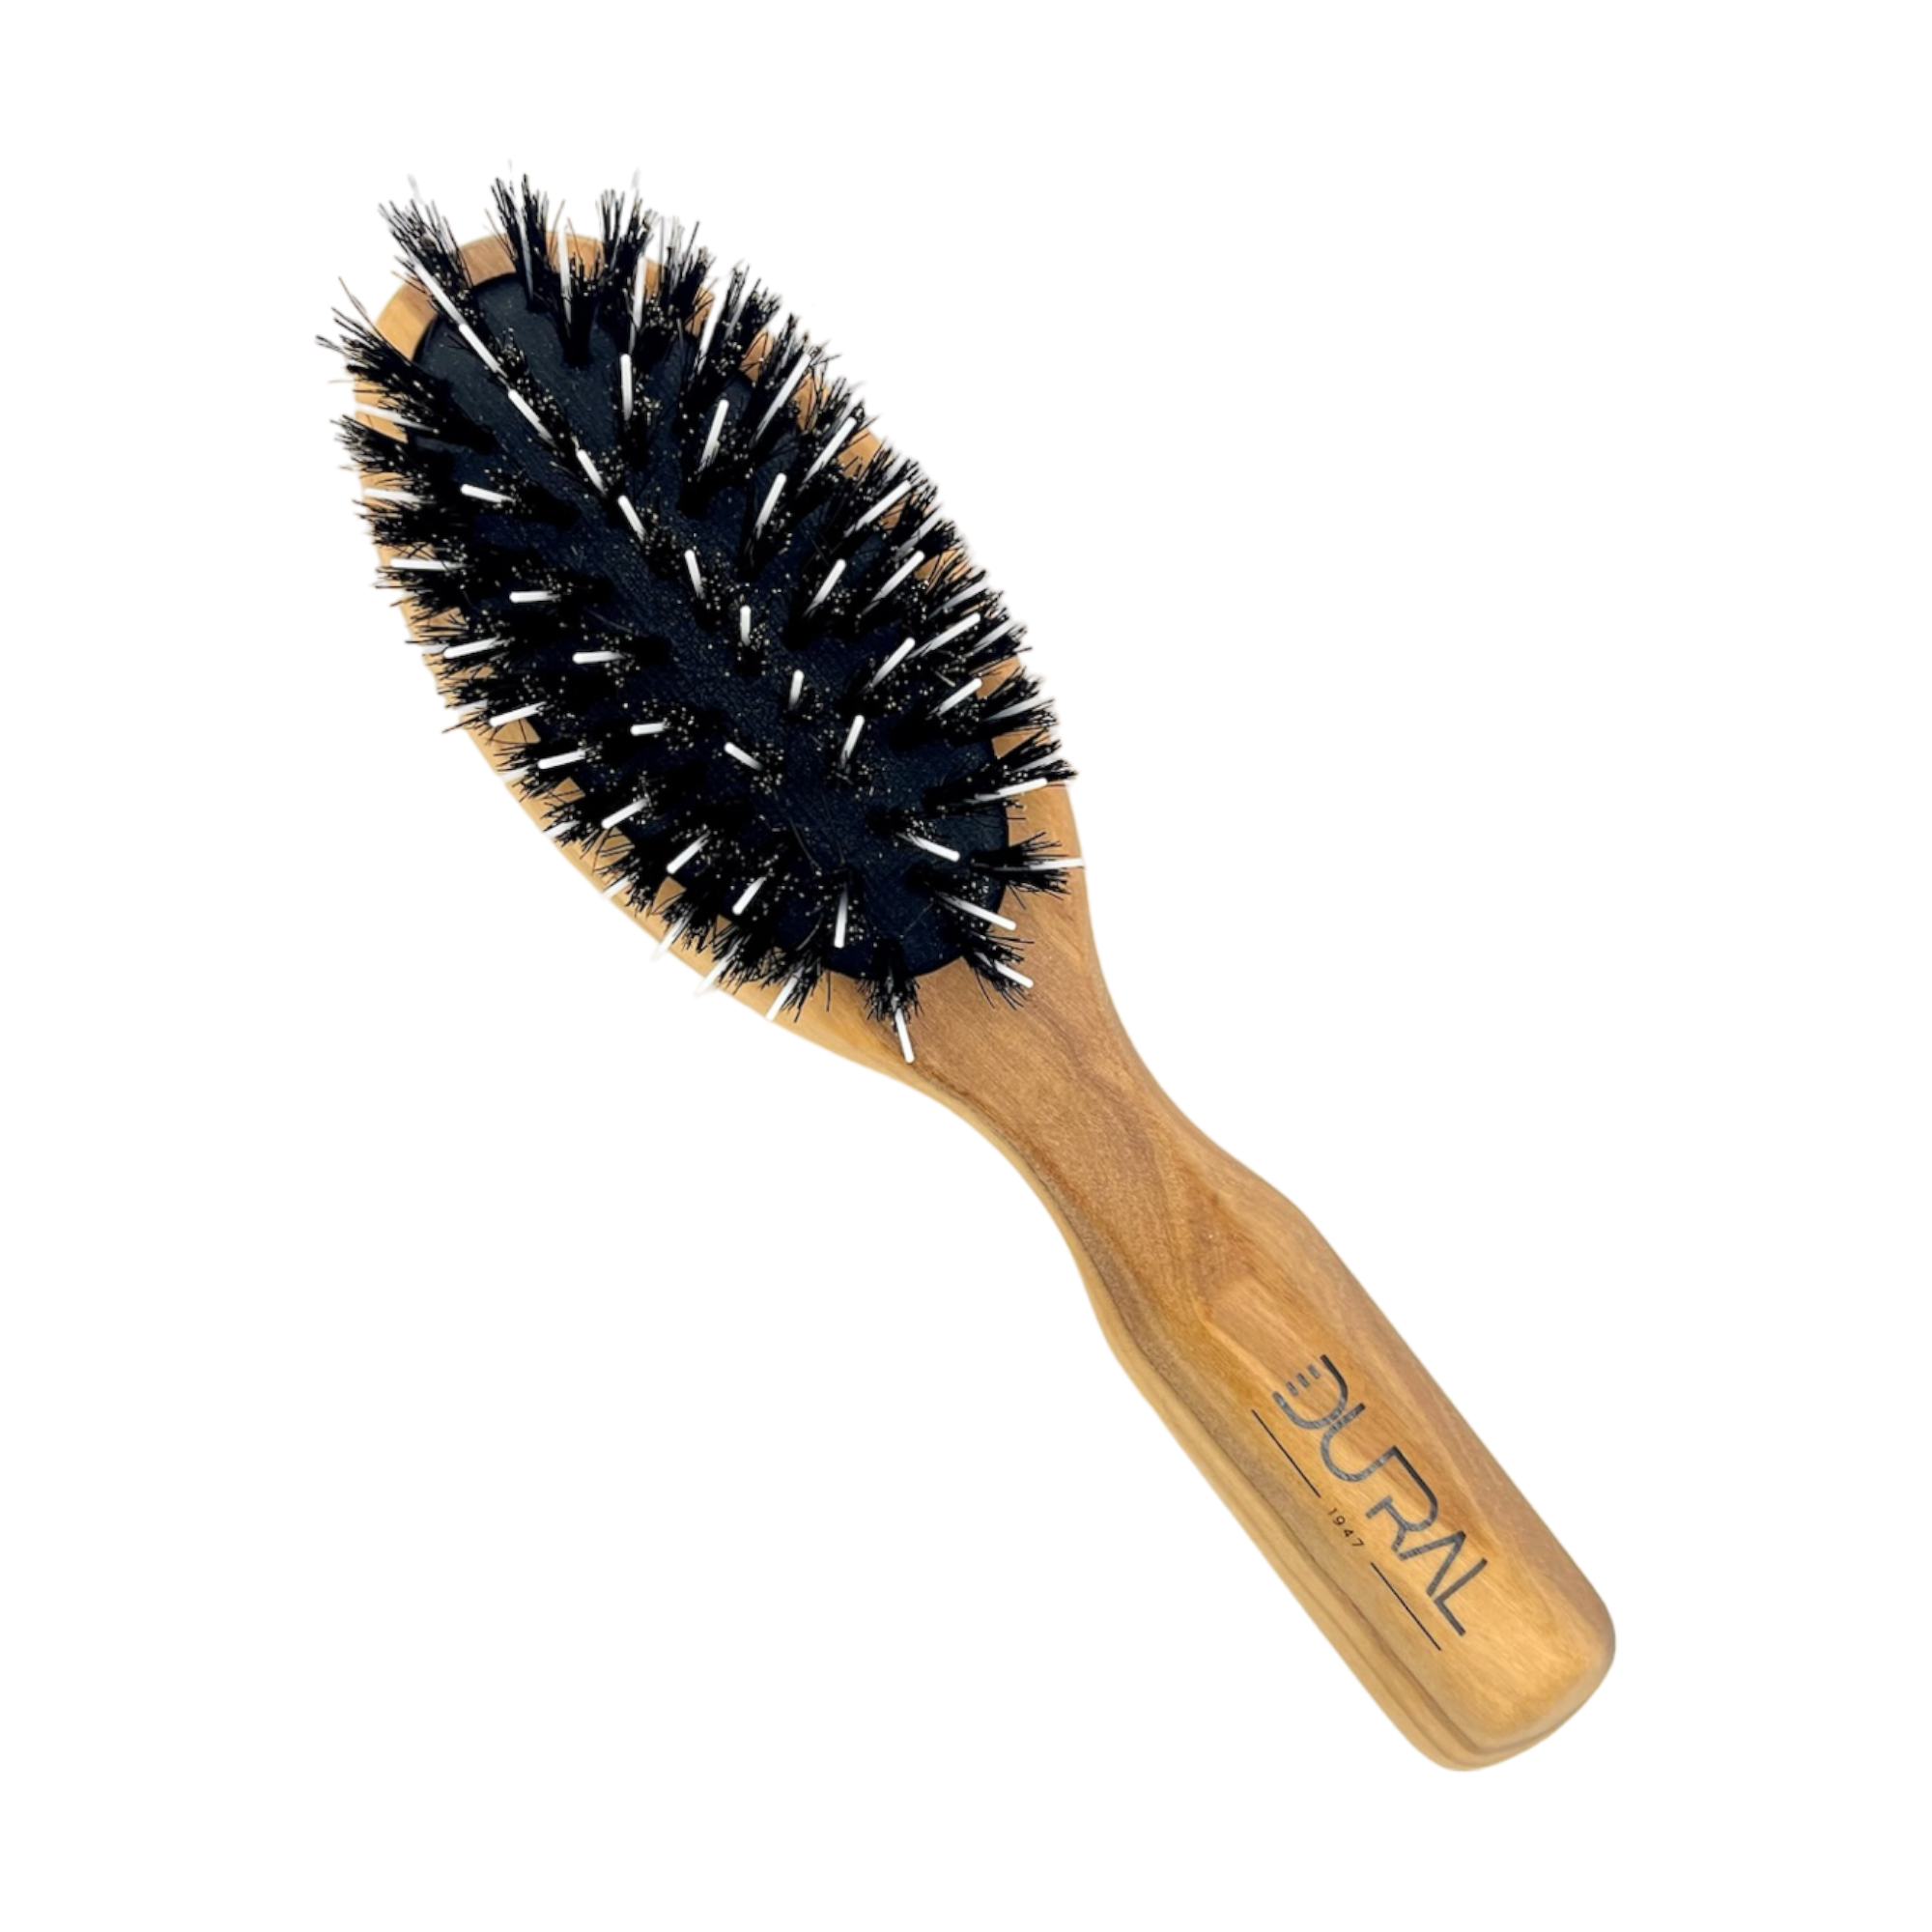 Dural Olive wood rubber cushion hair brush with boar bristles and nylon